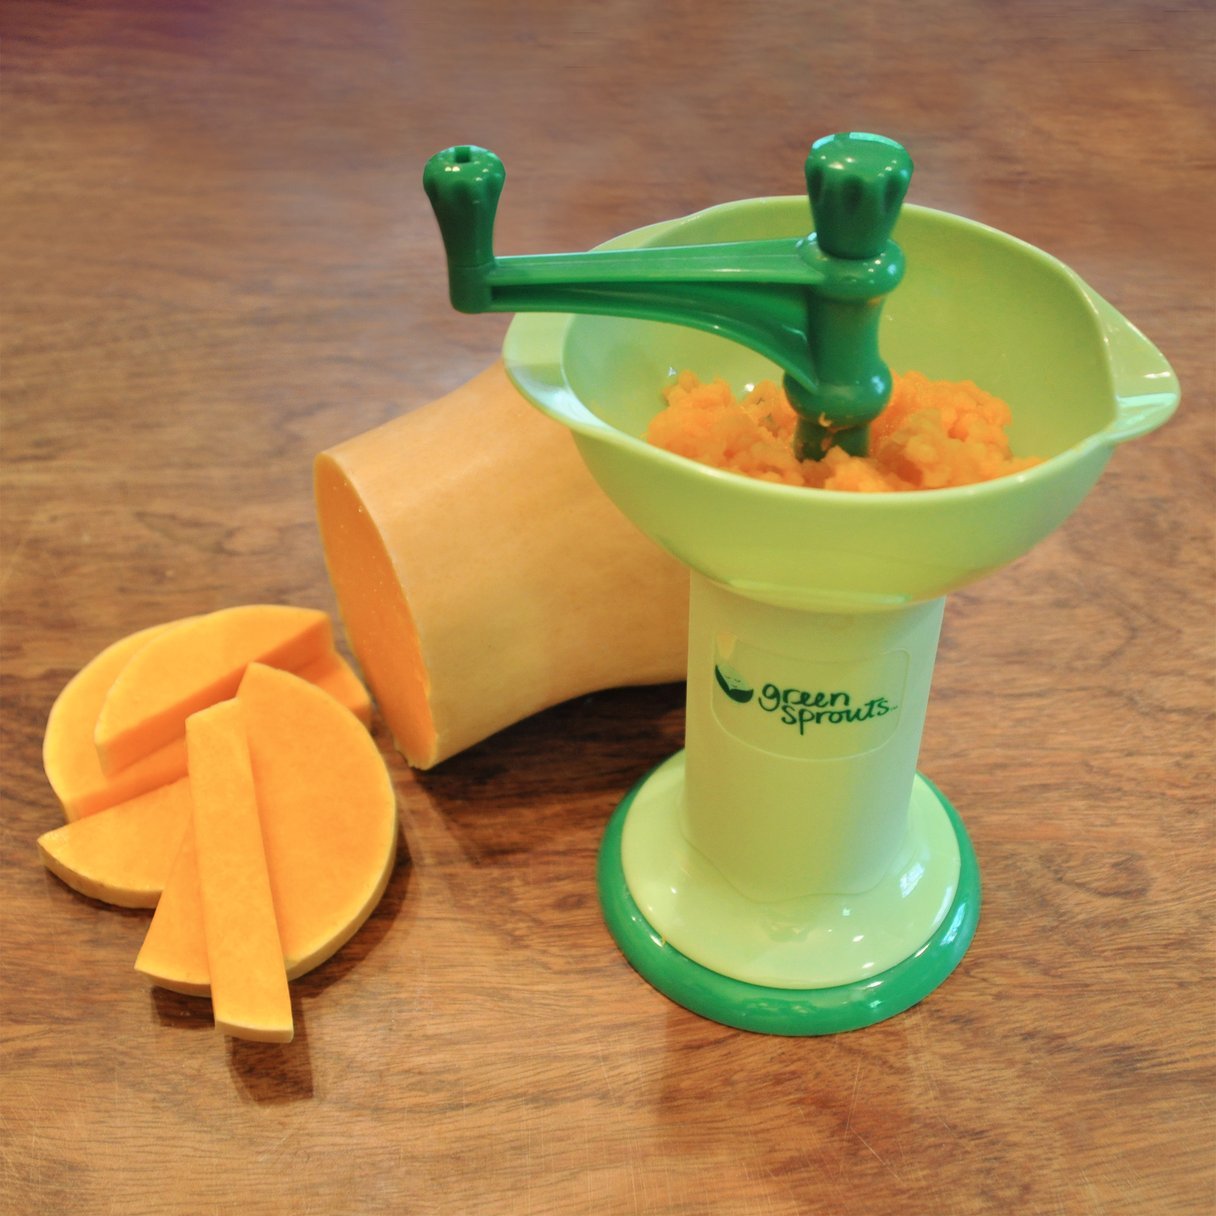 Food mill for grinding baby food